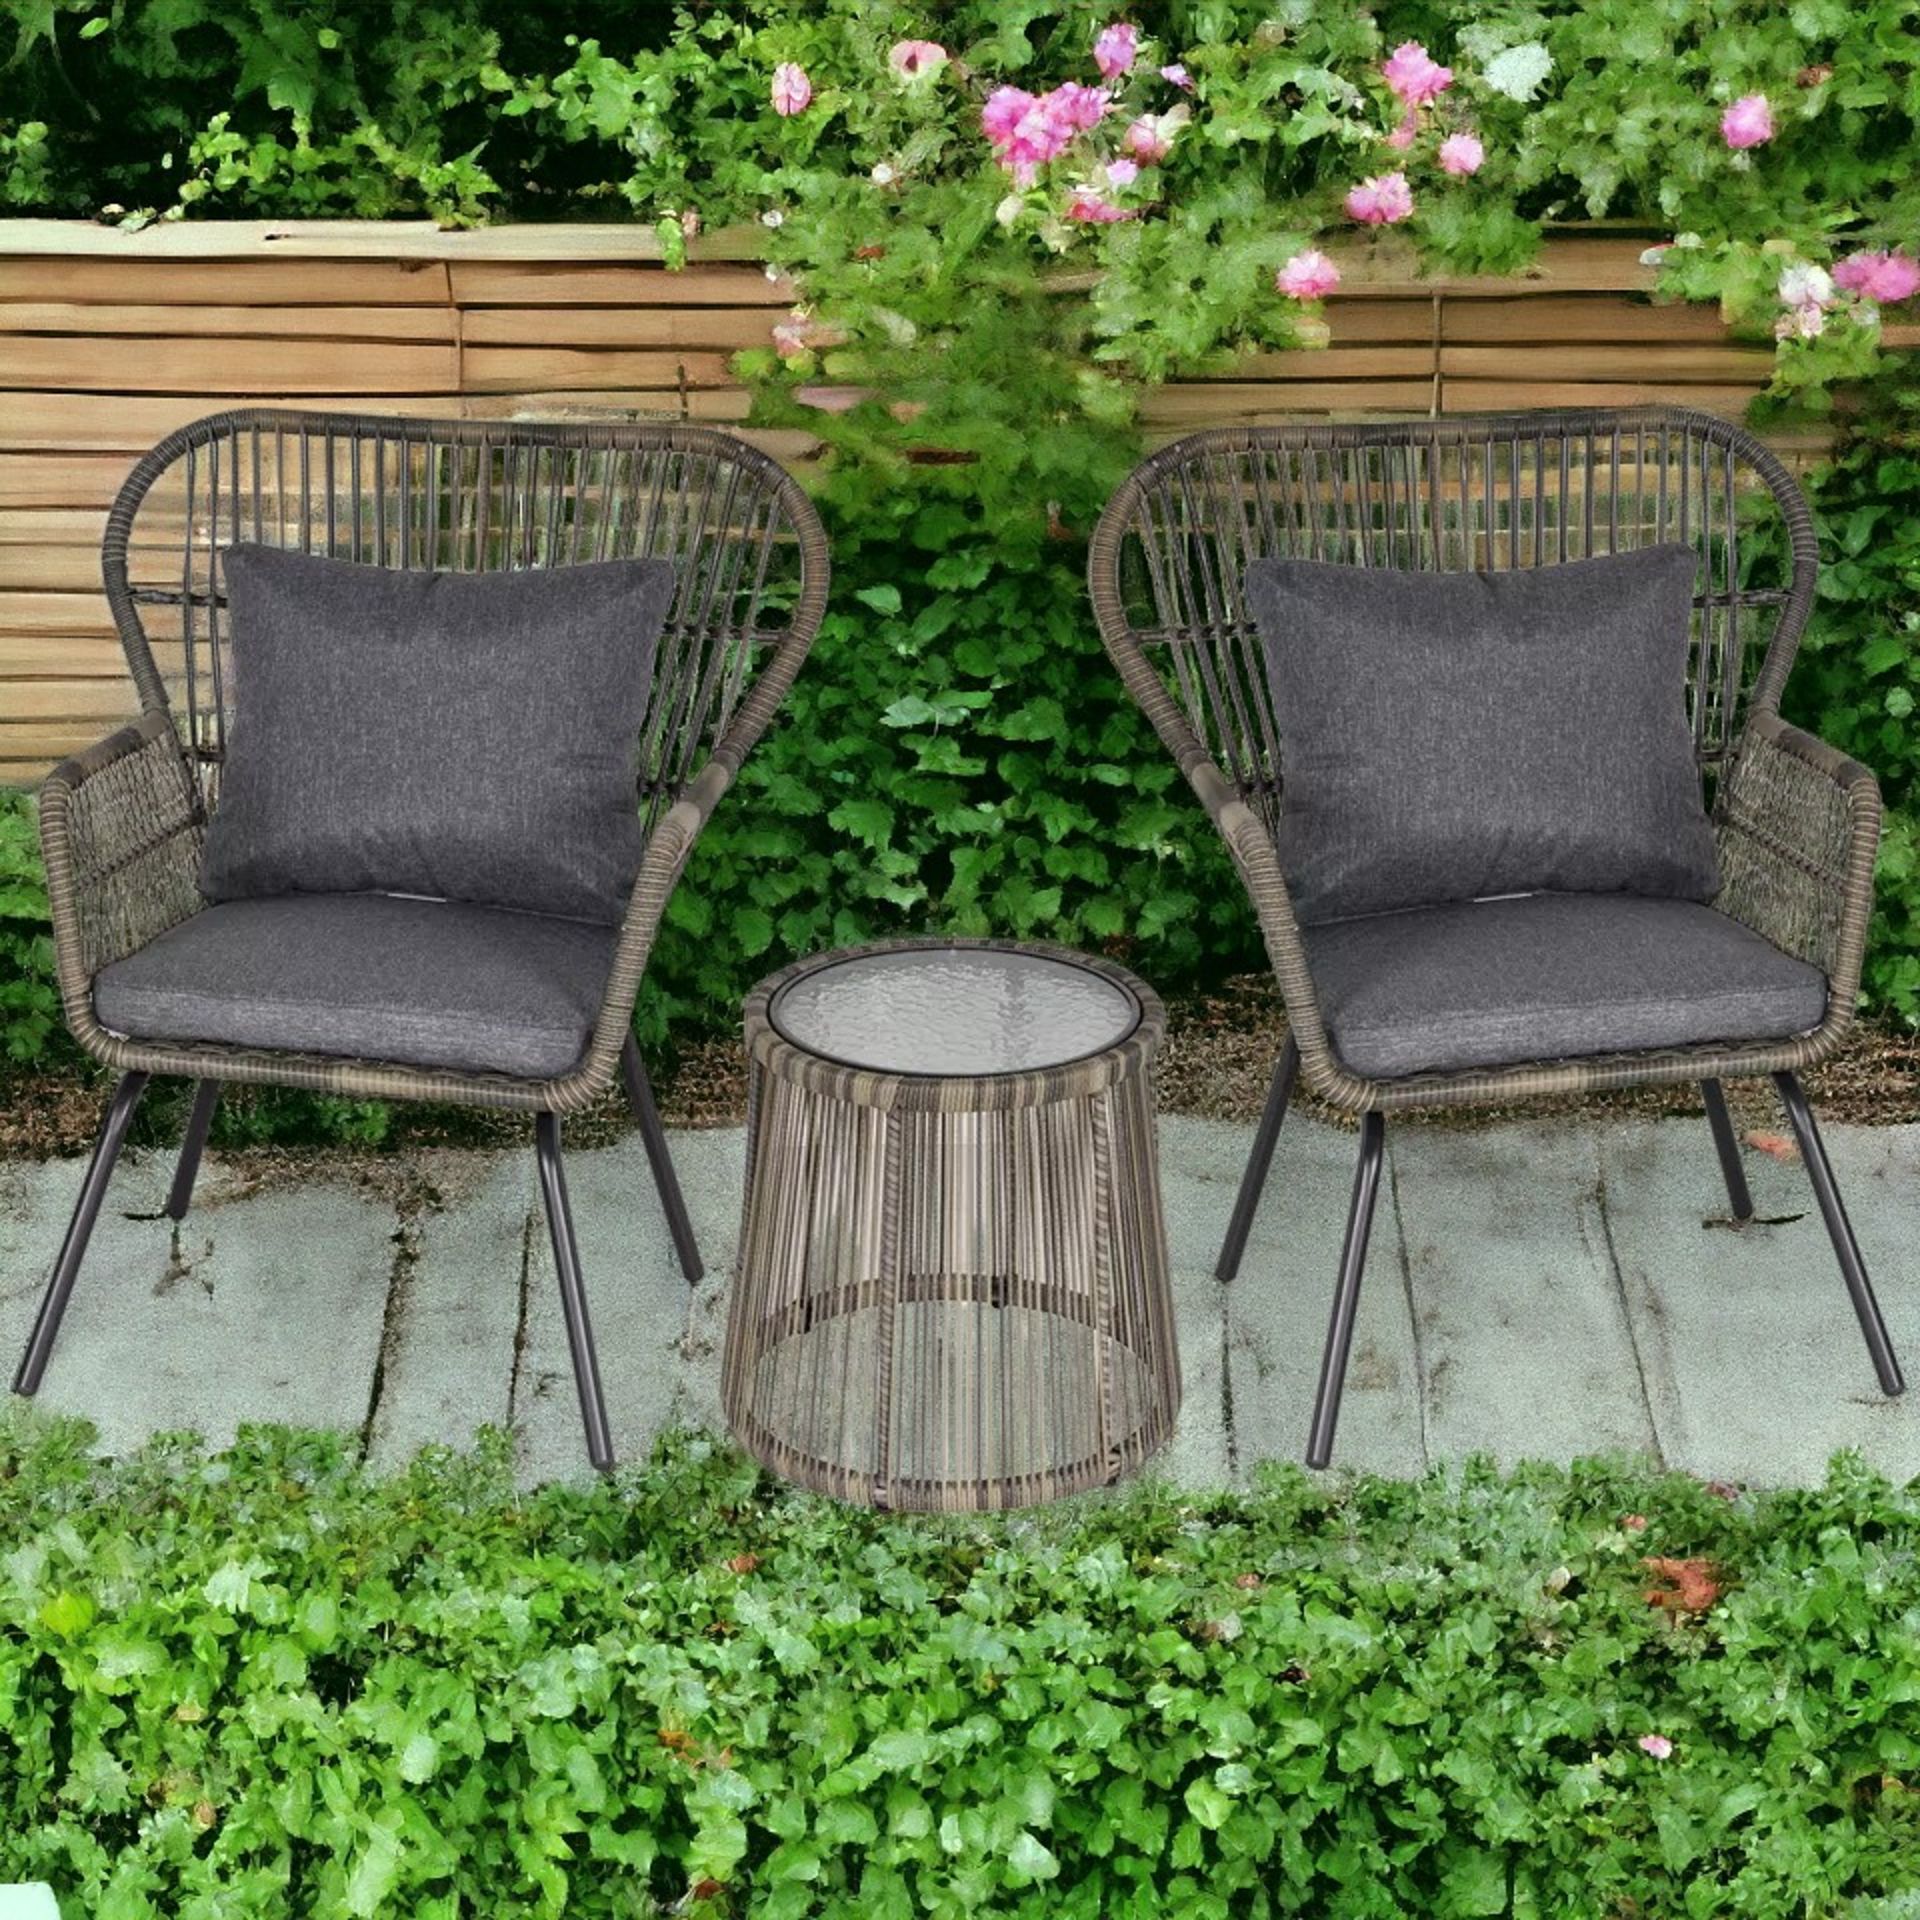 FREE DELIVERY -BRAND NEW 3 PCS WEBBED PE RATTAN OUTDOOR PATIO SET W/ CUSHIONS STEEL FRAME GREY - Bild 2 aus 2